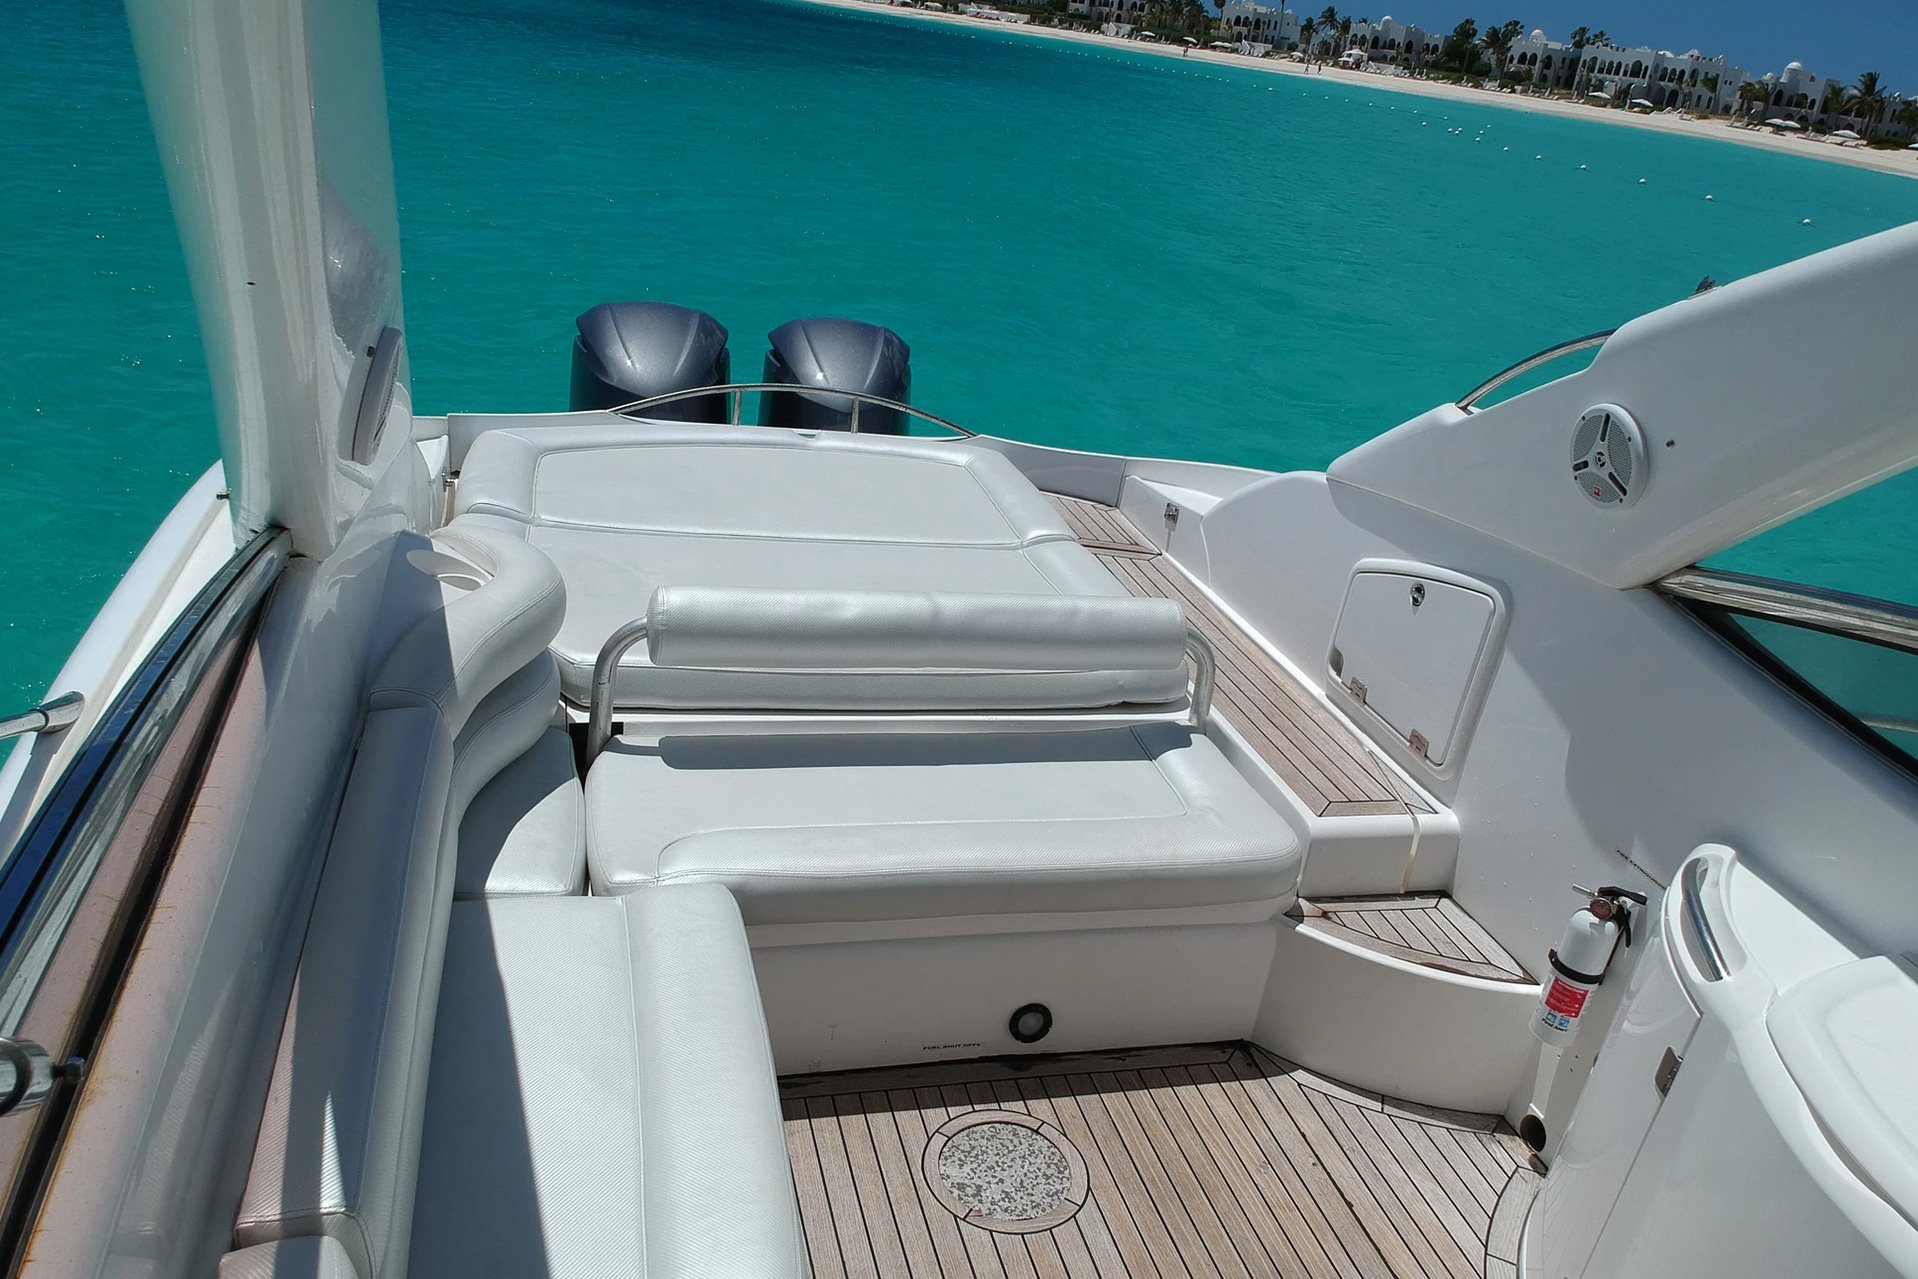 The Sunseeker 40 is an elegantly designed yacht, with clean lines.